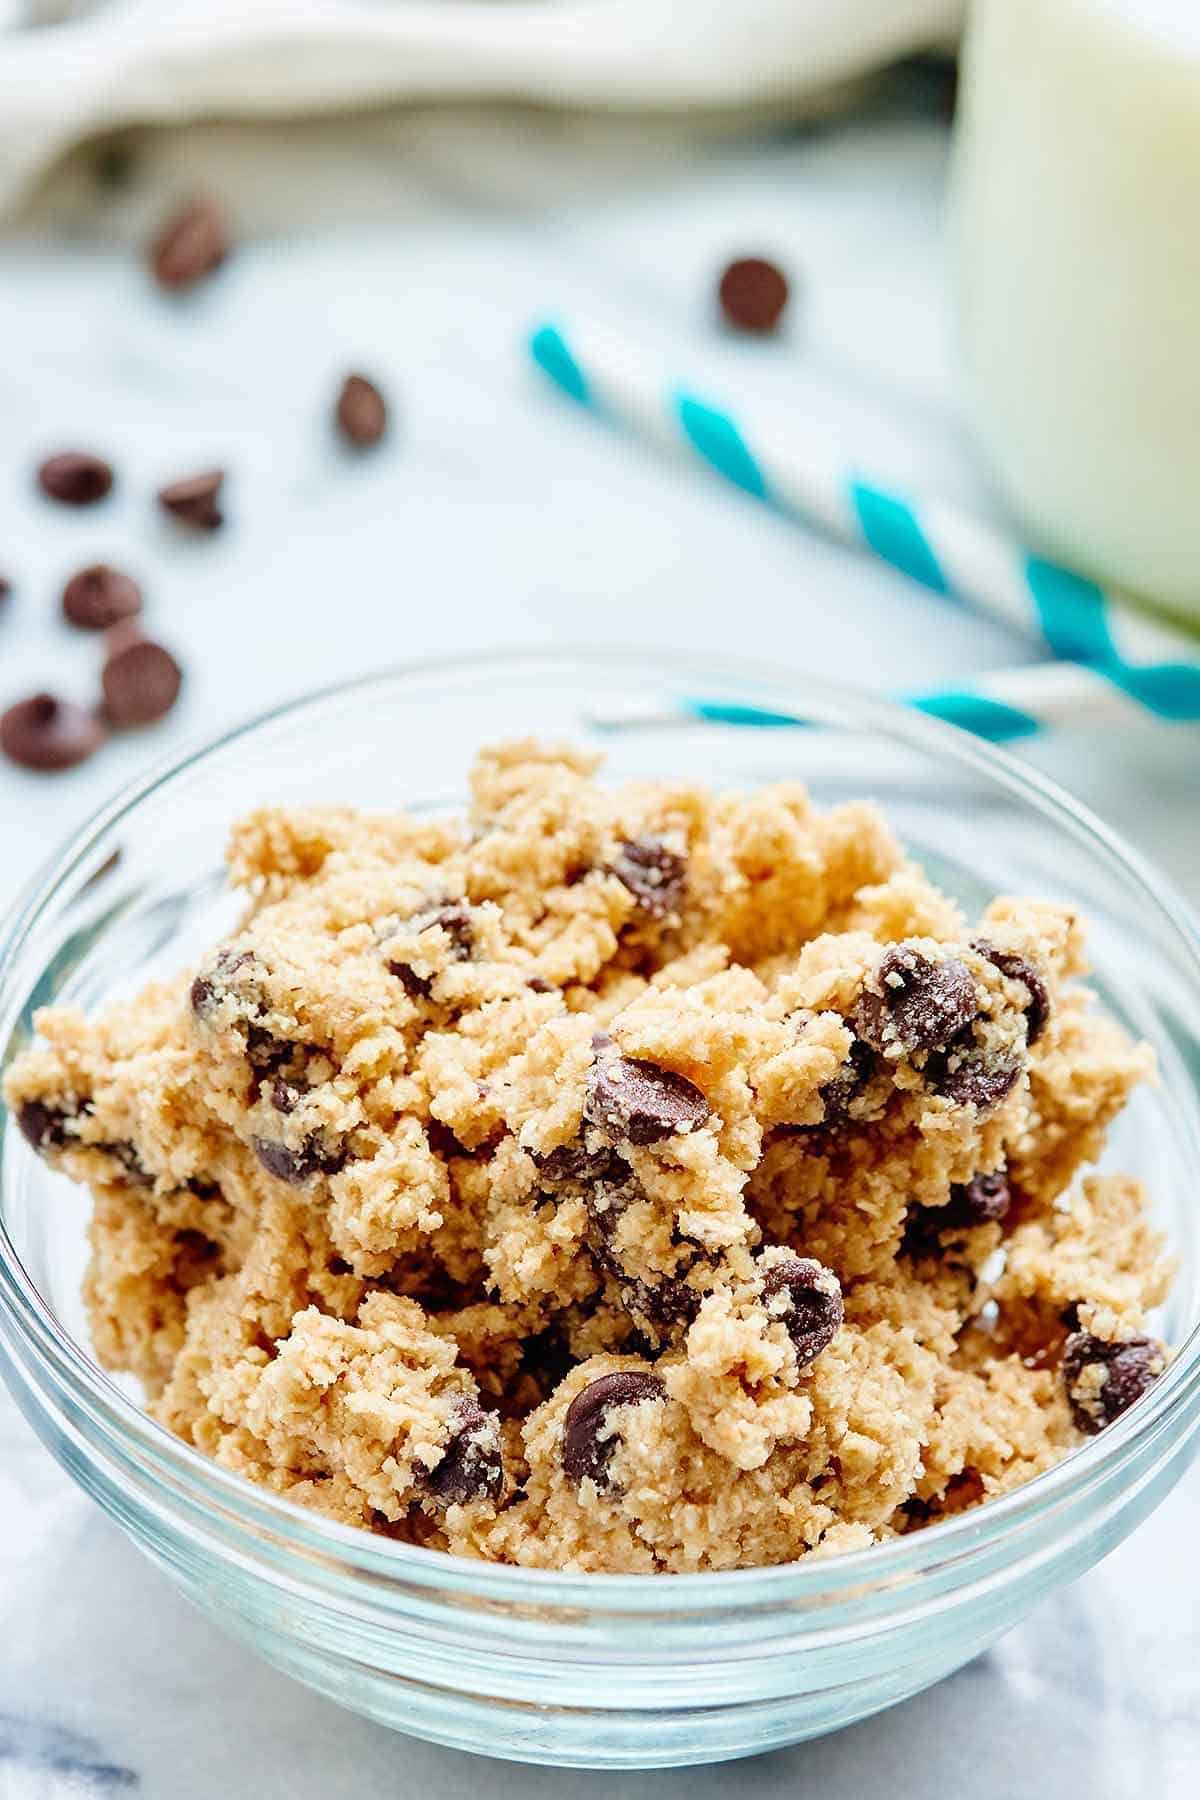 This Edible Cookie Dough Recipe is eggless and safe to eat raw! Theres no flour, we use homemade oat flour instead, & no eggs! Easy edible cookie dough for the win! showmetheyummy.com #cookiedough #dessert #eggless